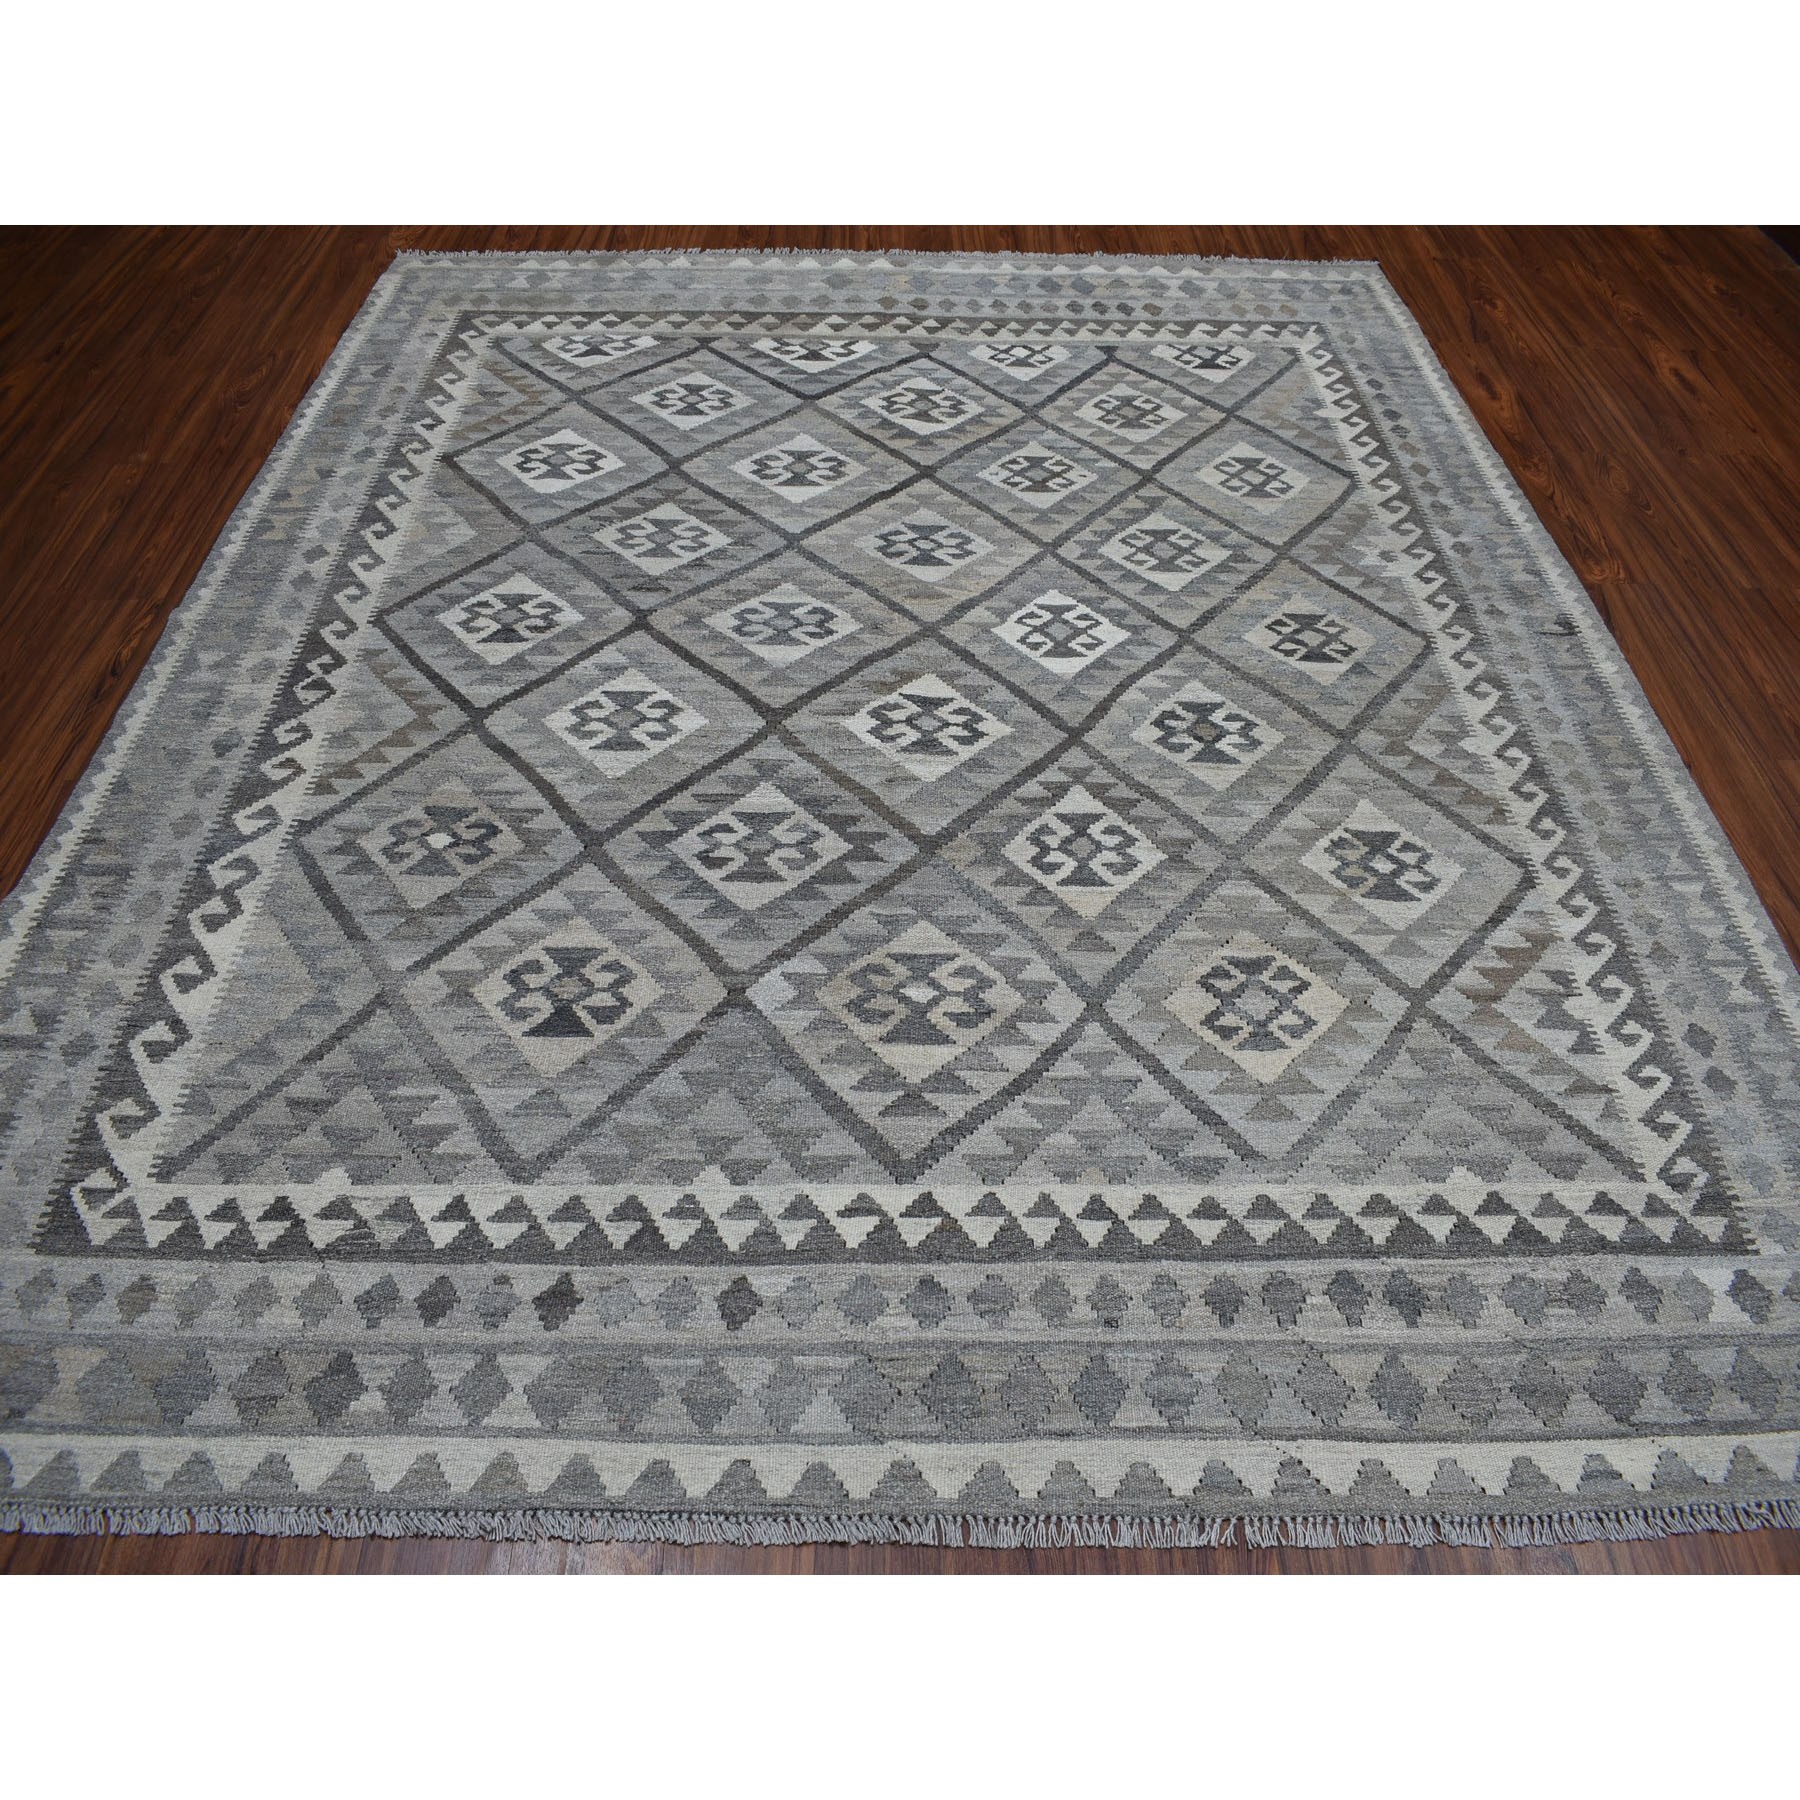 8-4 x9-5  Undyed Natural Wool Afghan Kilim Reversible Hand Woven Oriental Rug 